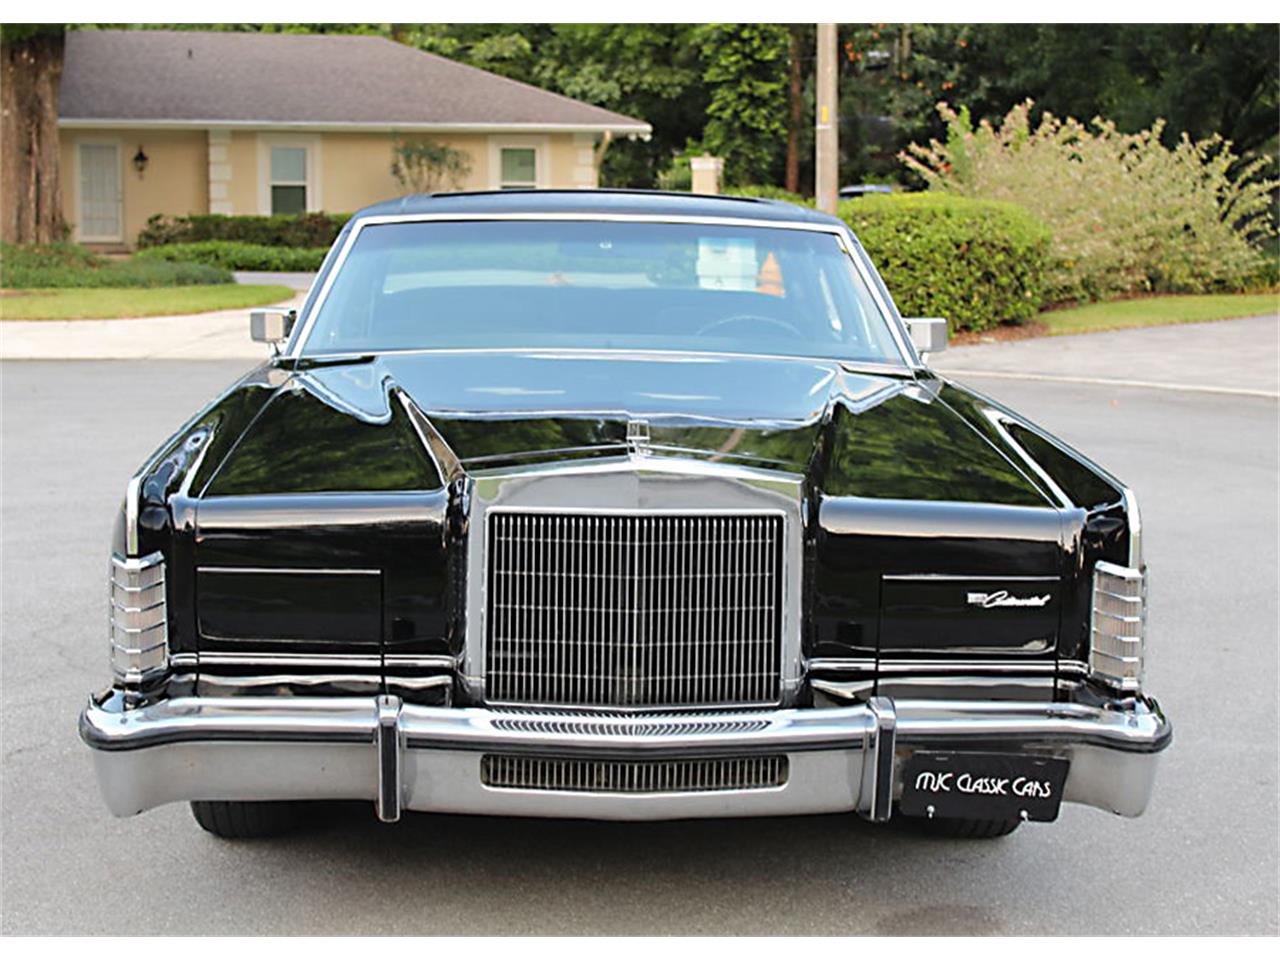 1977 Lincoln Town Car for sale in Lakeland, FL / classiccarsbay.com